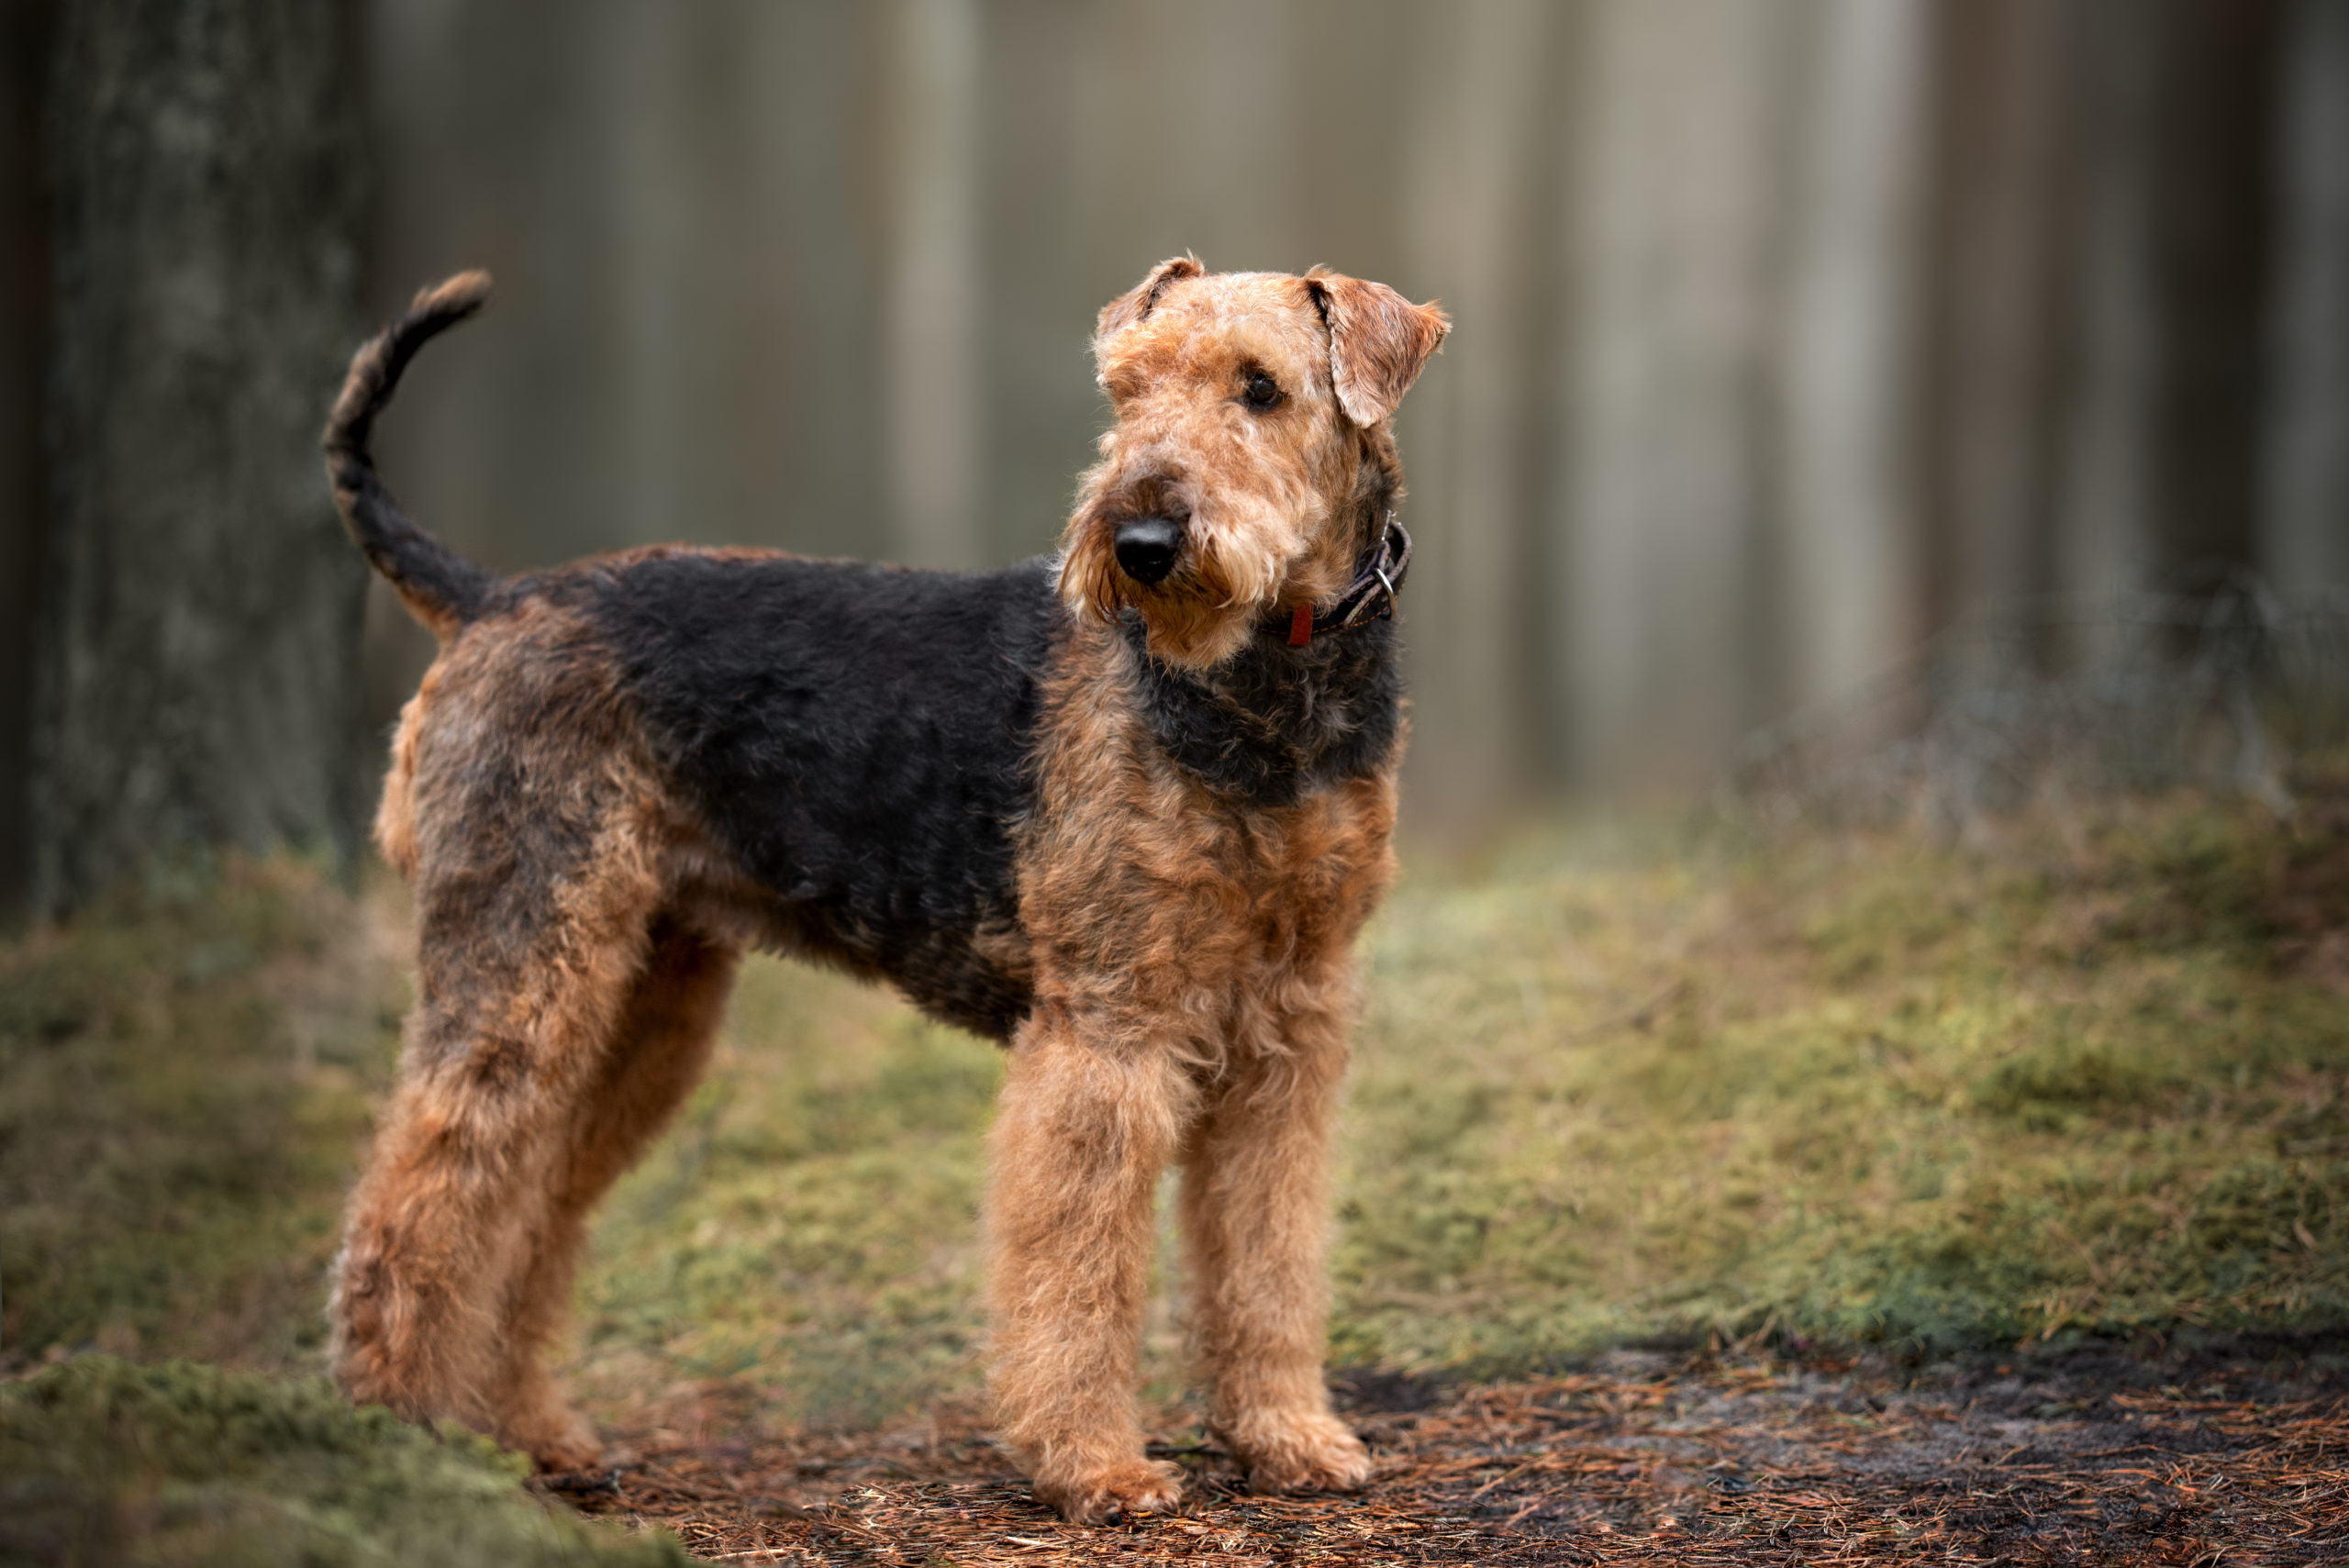 Airedale Terriers are known non-shedders